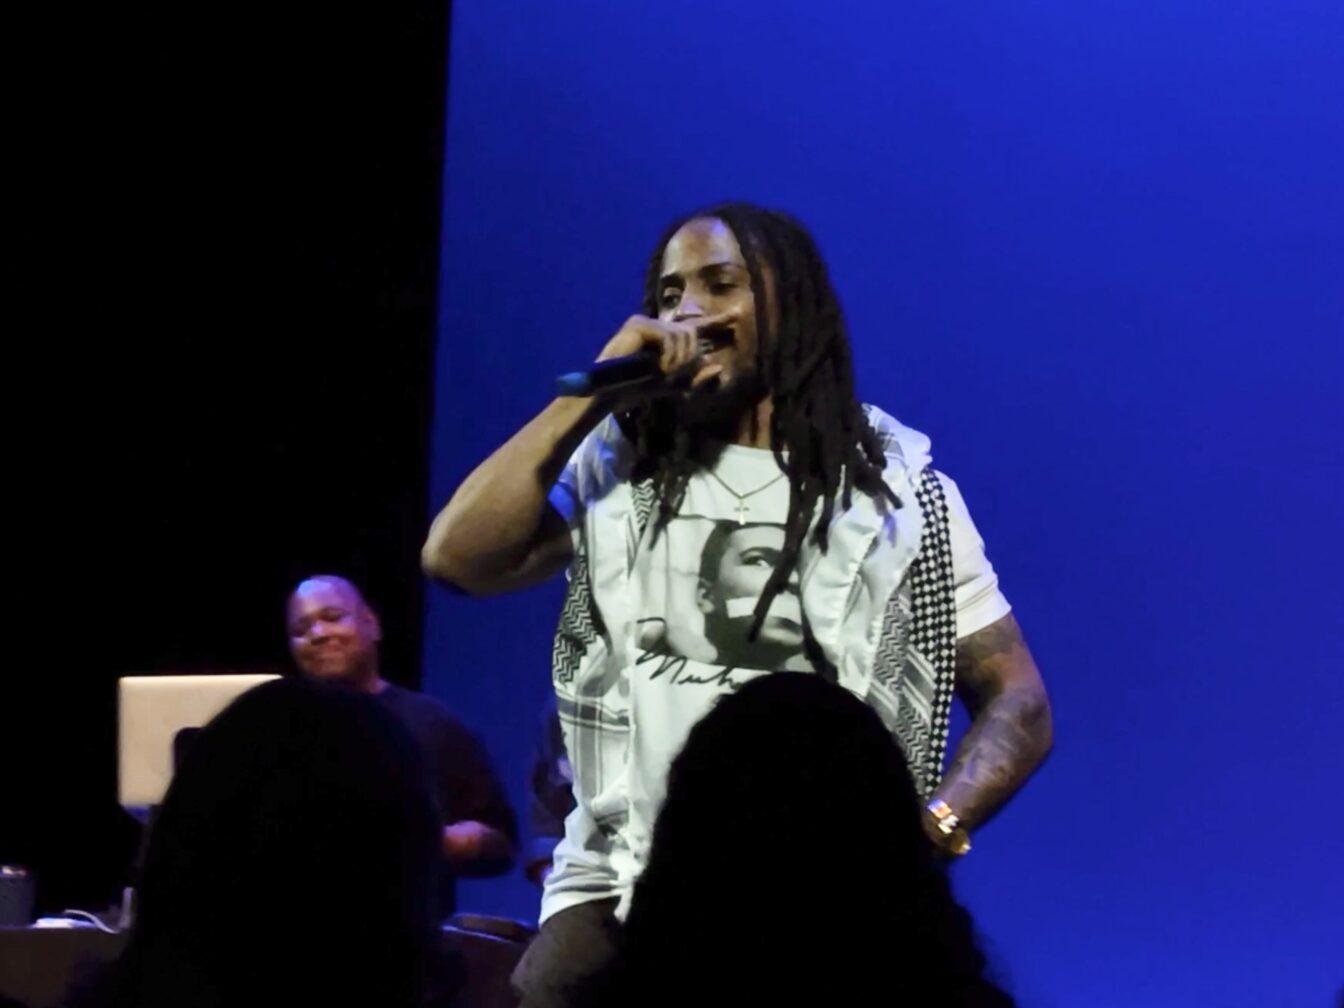 Grammy-nominated artist charms crowd in musical performance at BHM keynote event